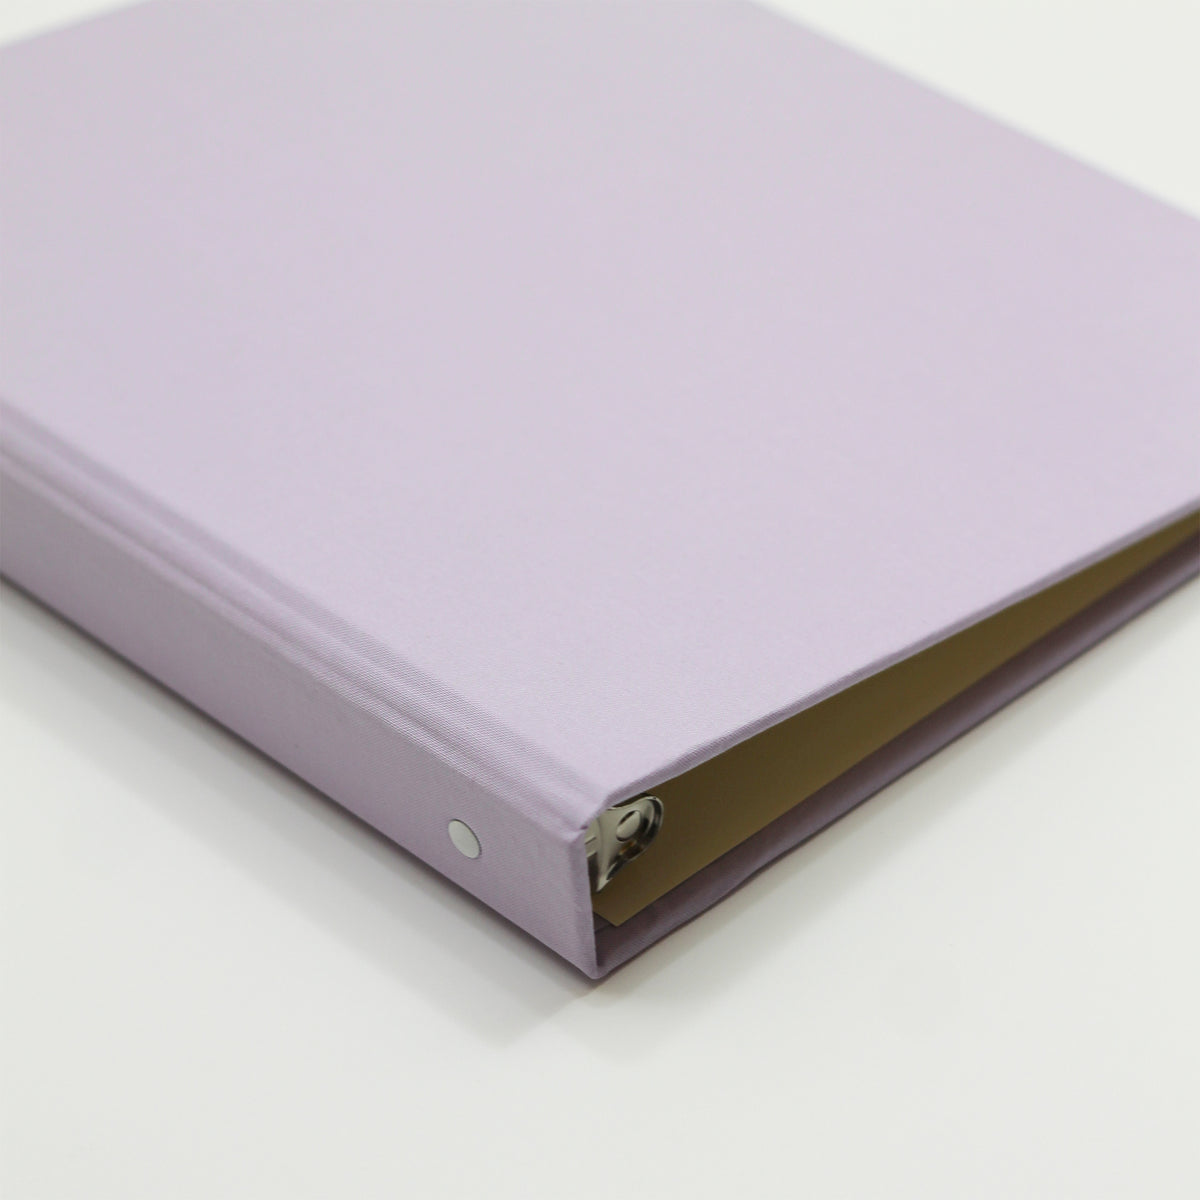 Large Postcard Album with Lavender Cotton Cover | Select Sleeves for 4x6 or 5x7 Postcards